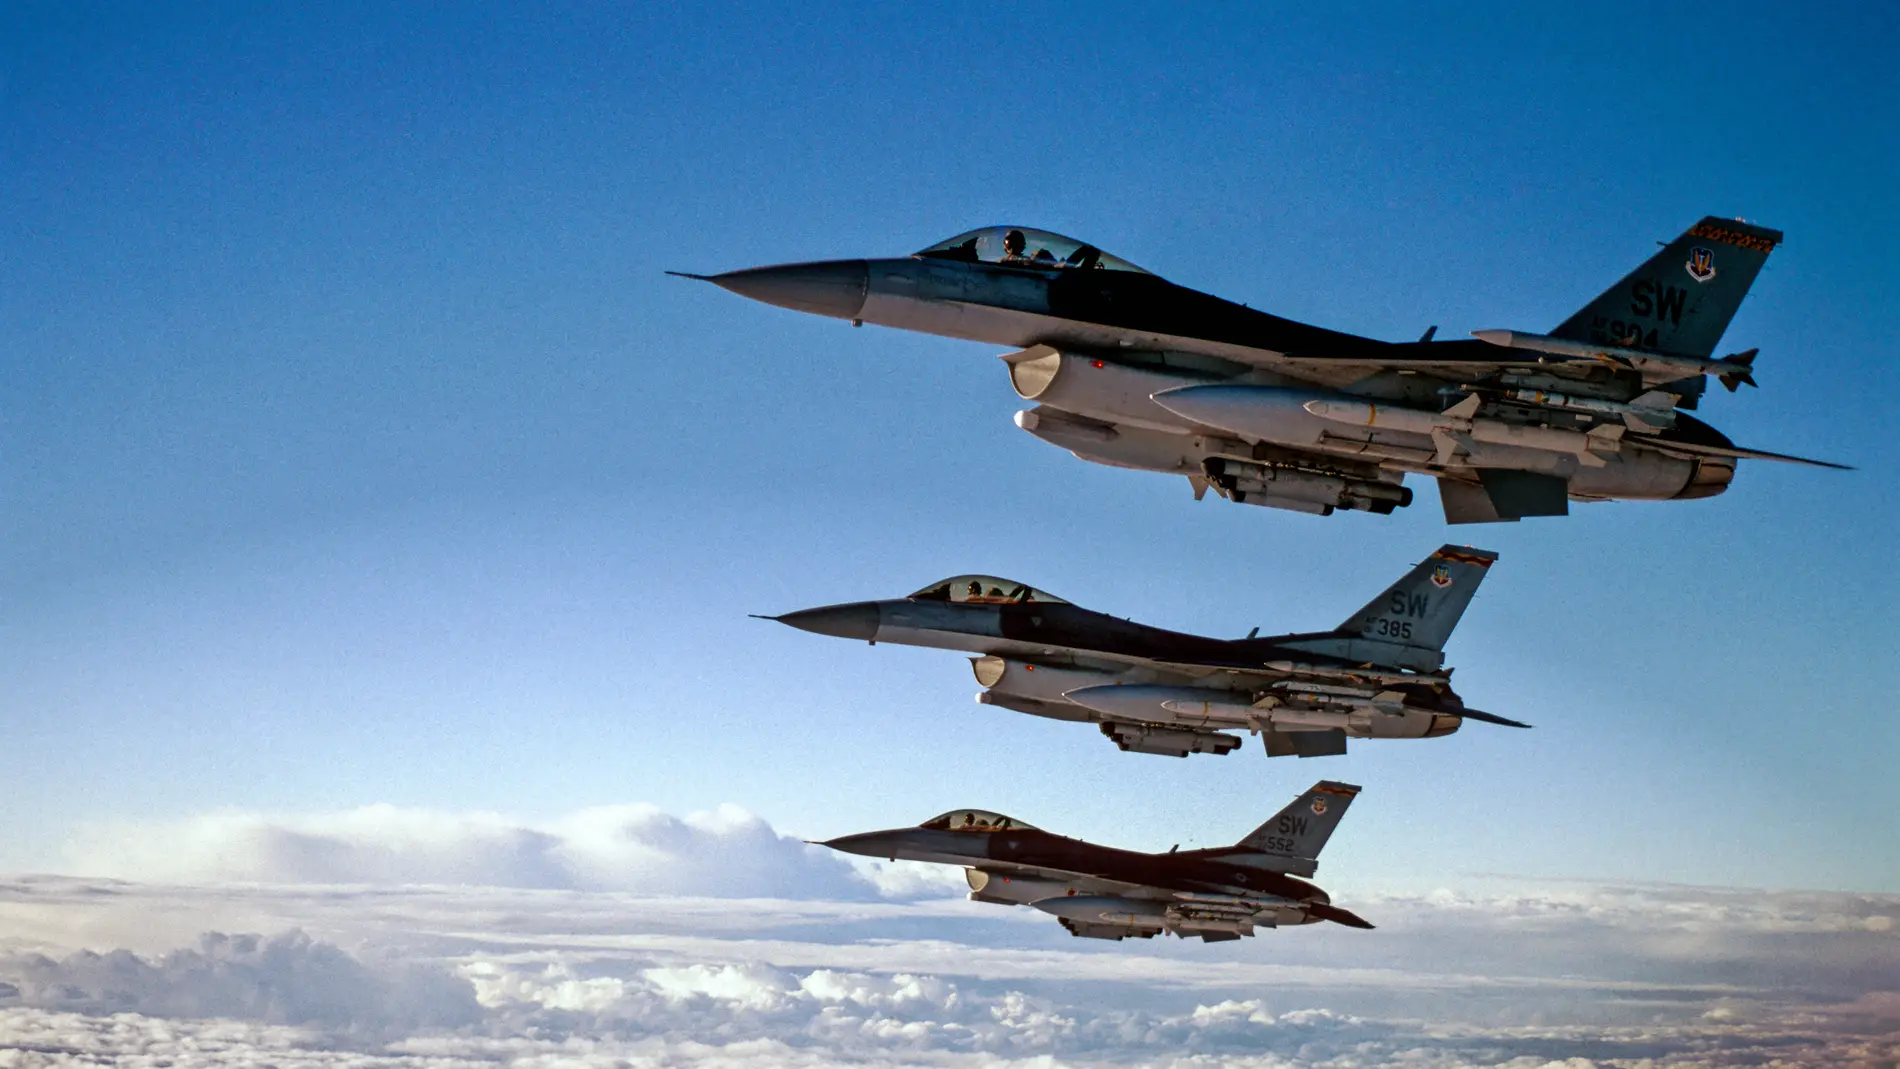 Oct. 6, 2013 - U.S - USAF F-16..The F-16A, a single-seat model, first flew in December 1976. The first operational F-16A was delivered in January 1979 to the 388th Tactical Fighter Wing at Hill Air Force Base, Utah...The F-16B, a two-seat model, has tandem cockpits that are about the same size as the one in the A model. Its bubble canopy extends to cover the second cockpit. To make room for the second cockpit, the forward fuselage fuel tank and avionics growth space were reduced. During train...